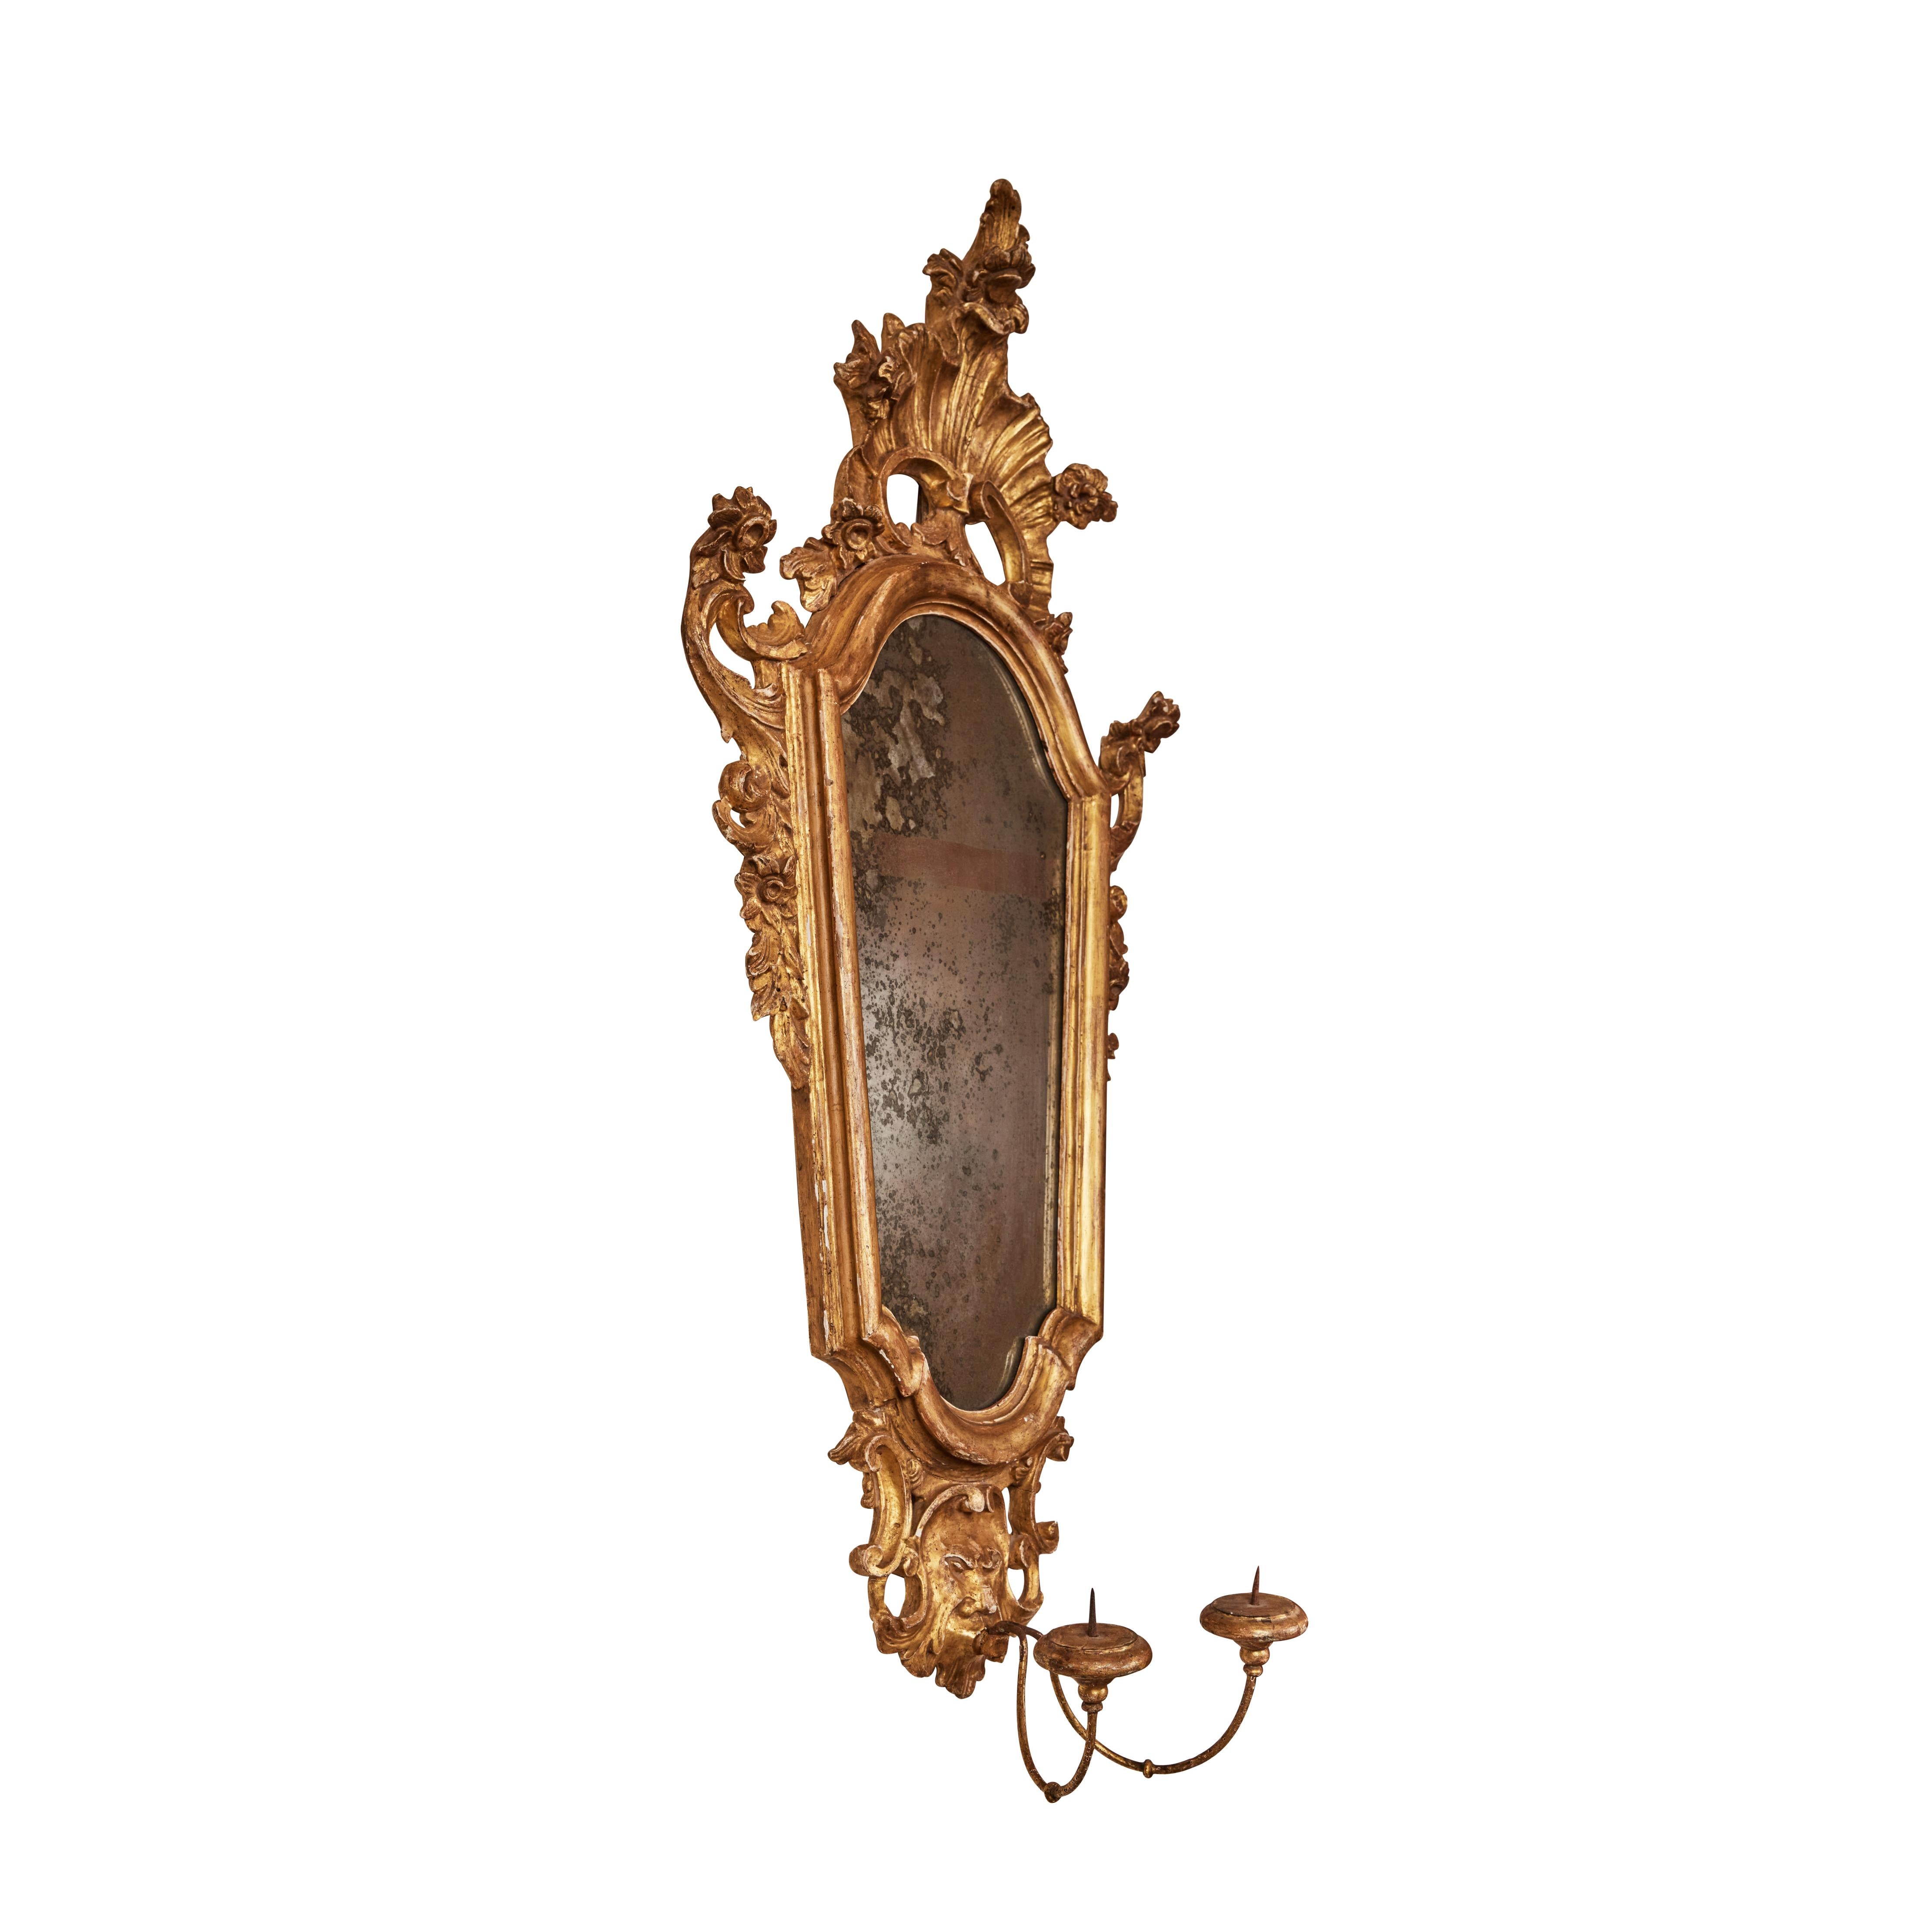 Pair of carved, gessoed and gilded framed mirrors. Original mirror with age appropriate spotting and loss of silvering to plates. Gilded tole and wood candleholders. From the area of Florence.